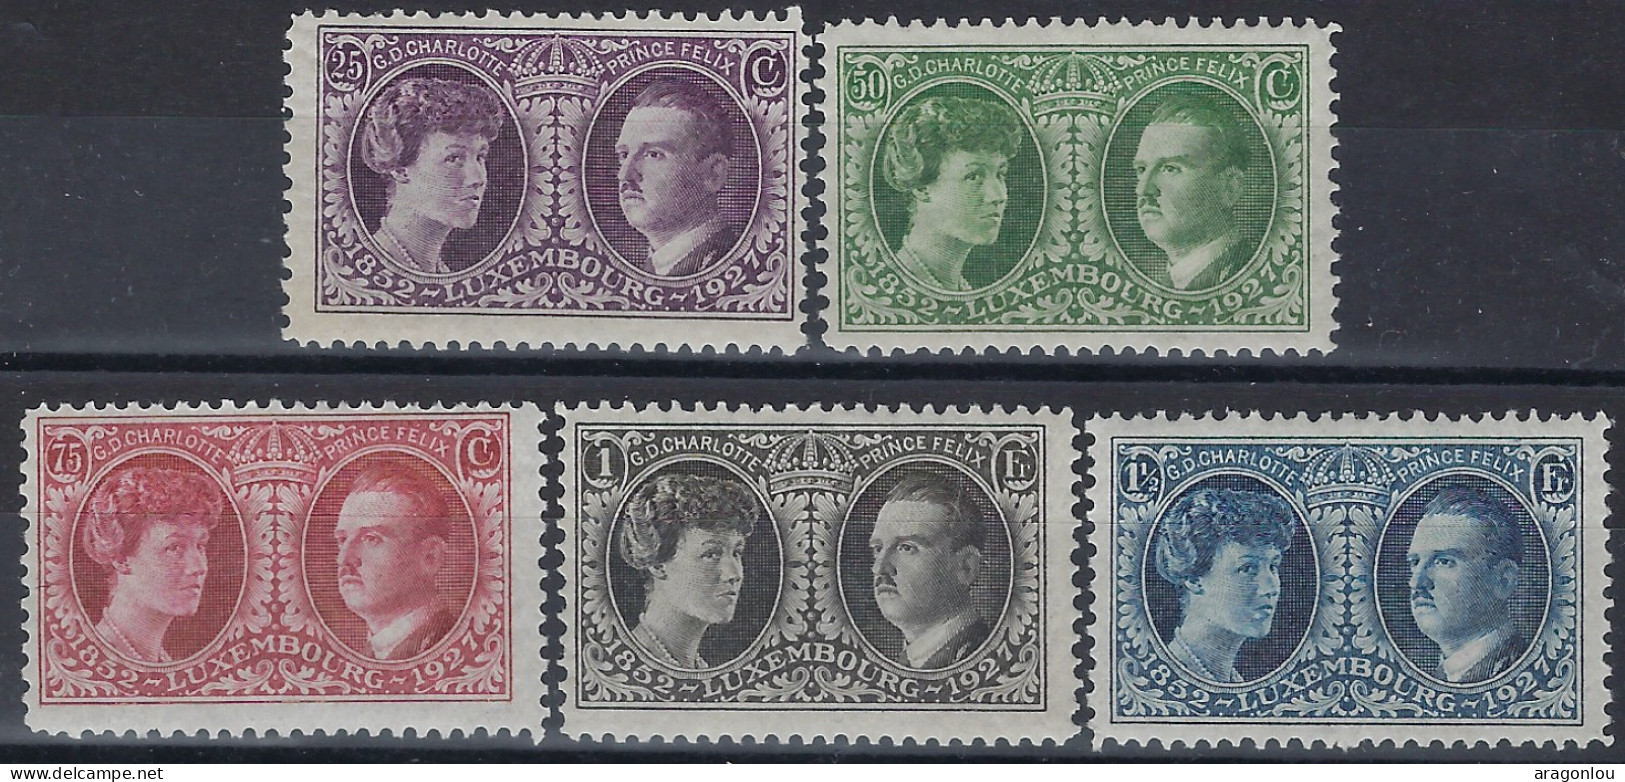 Luxembourg - Luxemburg - Timbre   1927   Couple Grand-Ducal   Série  VC. 20,-  MNH** - Blocs & Feuillets